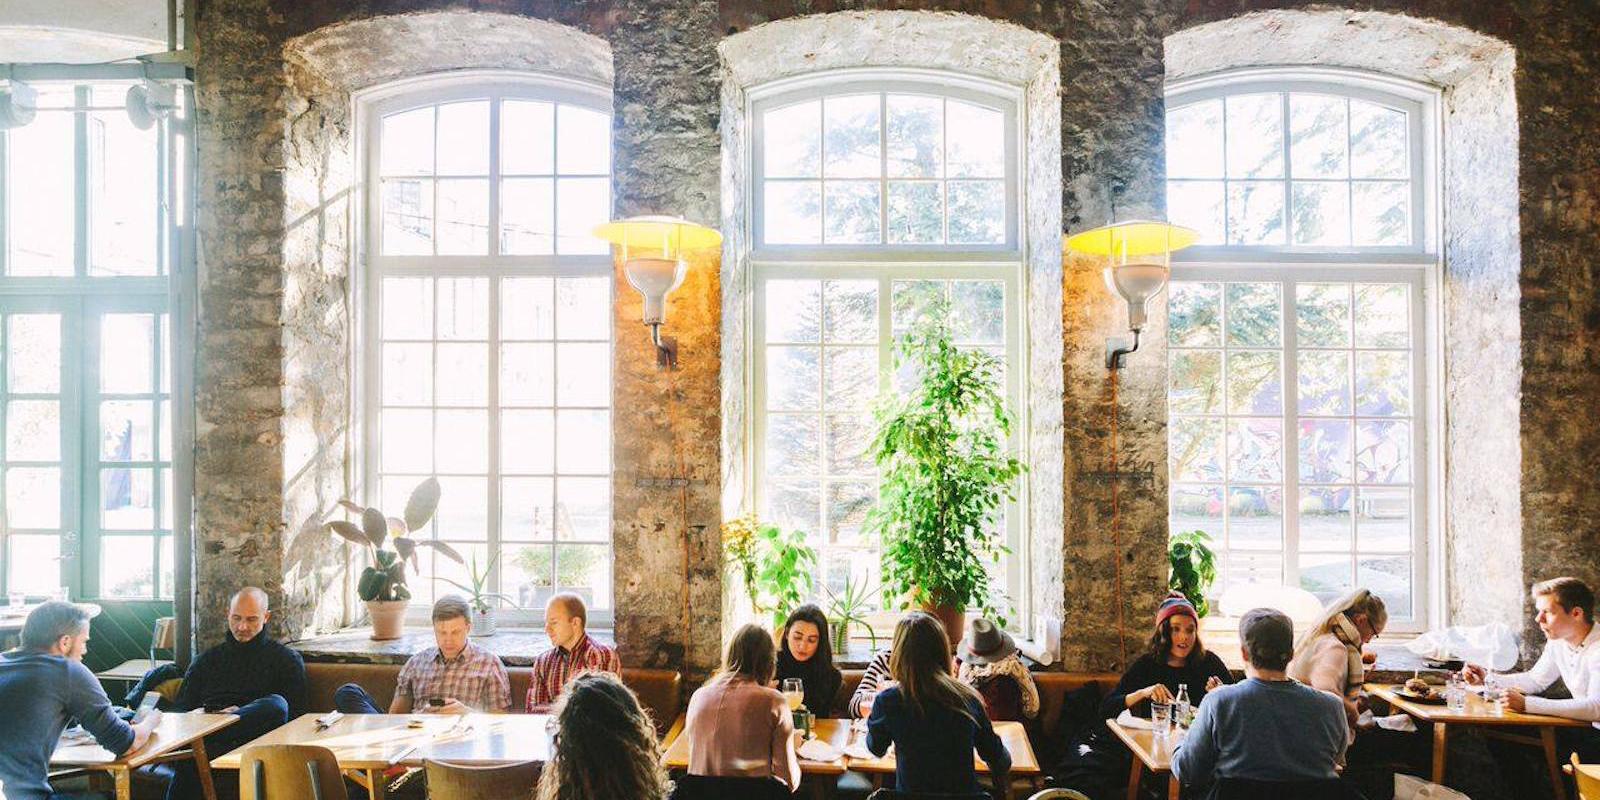 The popular restaurant F-hoone established in the imposing century-old industrial building is one of the phenomena of the Tallinn food scene. This fam